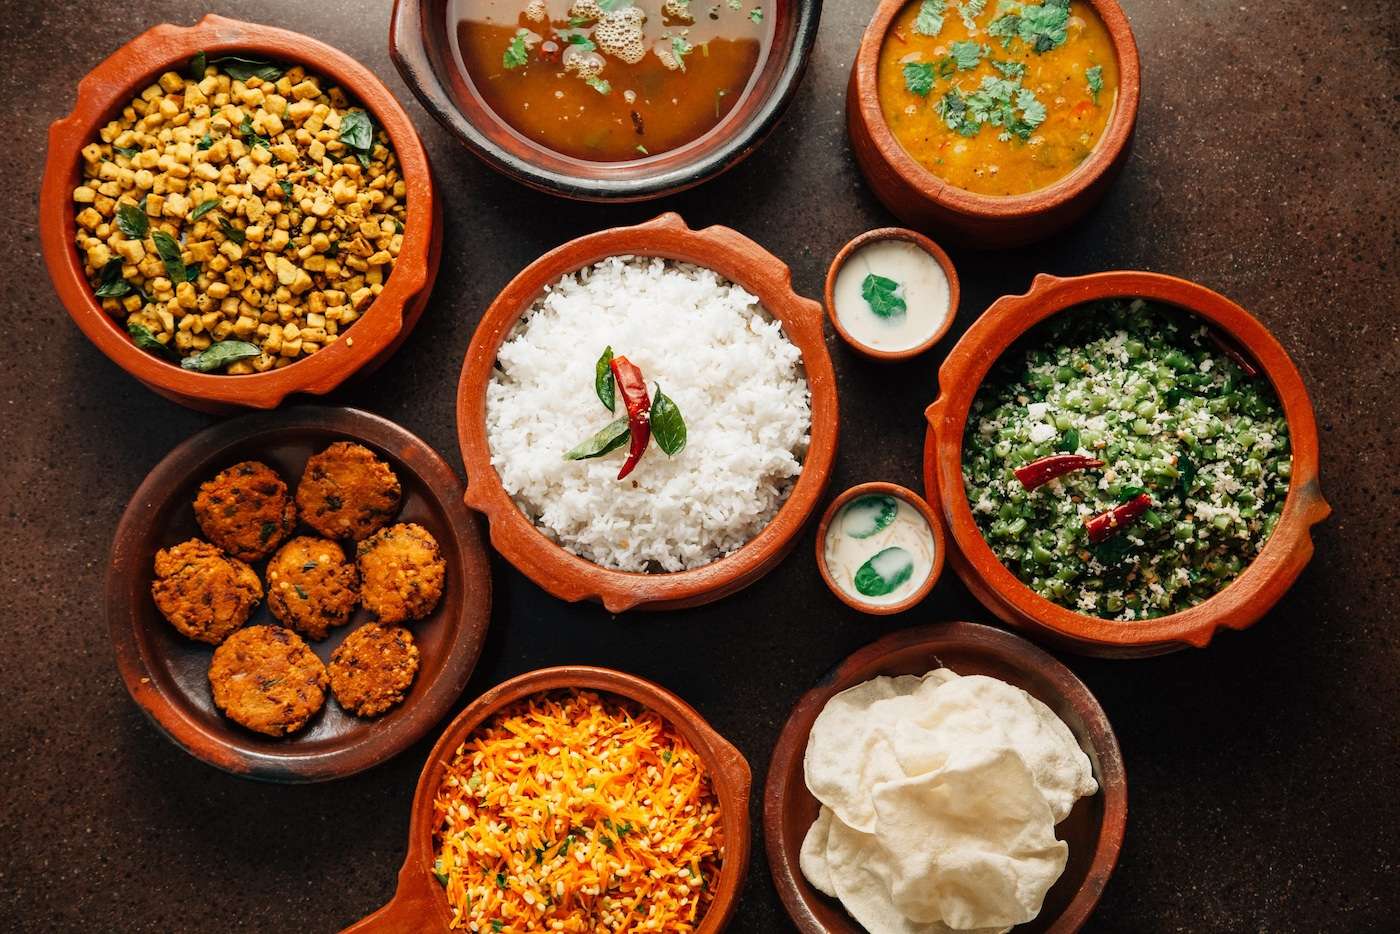 Learn to cook authentic south Indian food at local hostess Durga’s home in Chennai, through Traveling Spoon. It’s just one of many food-focused opportunities available in India.